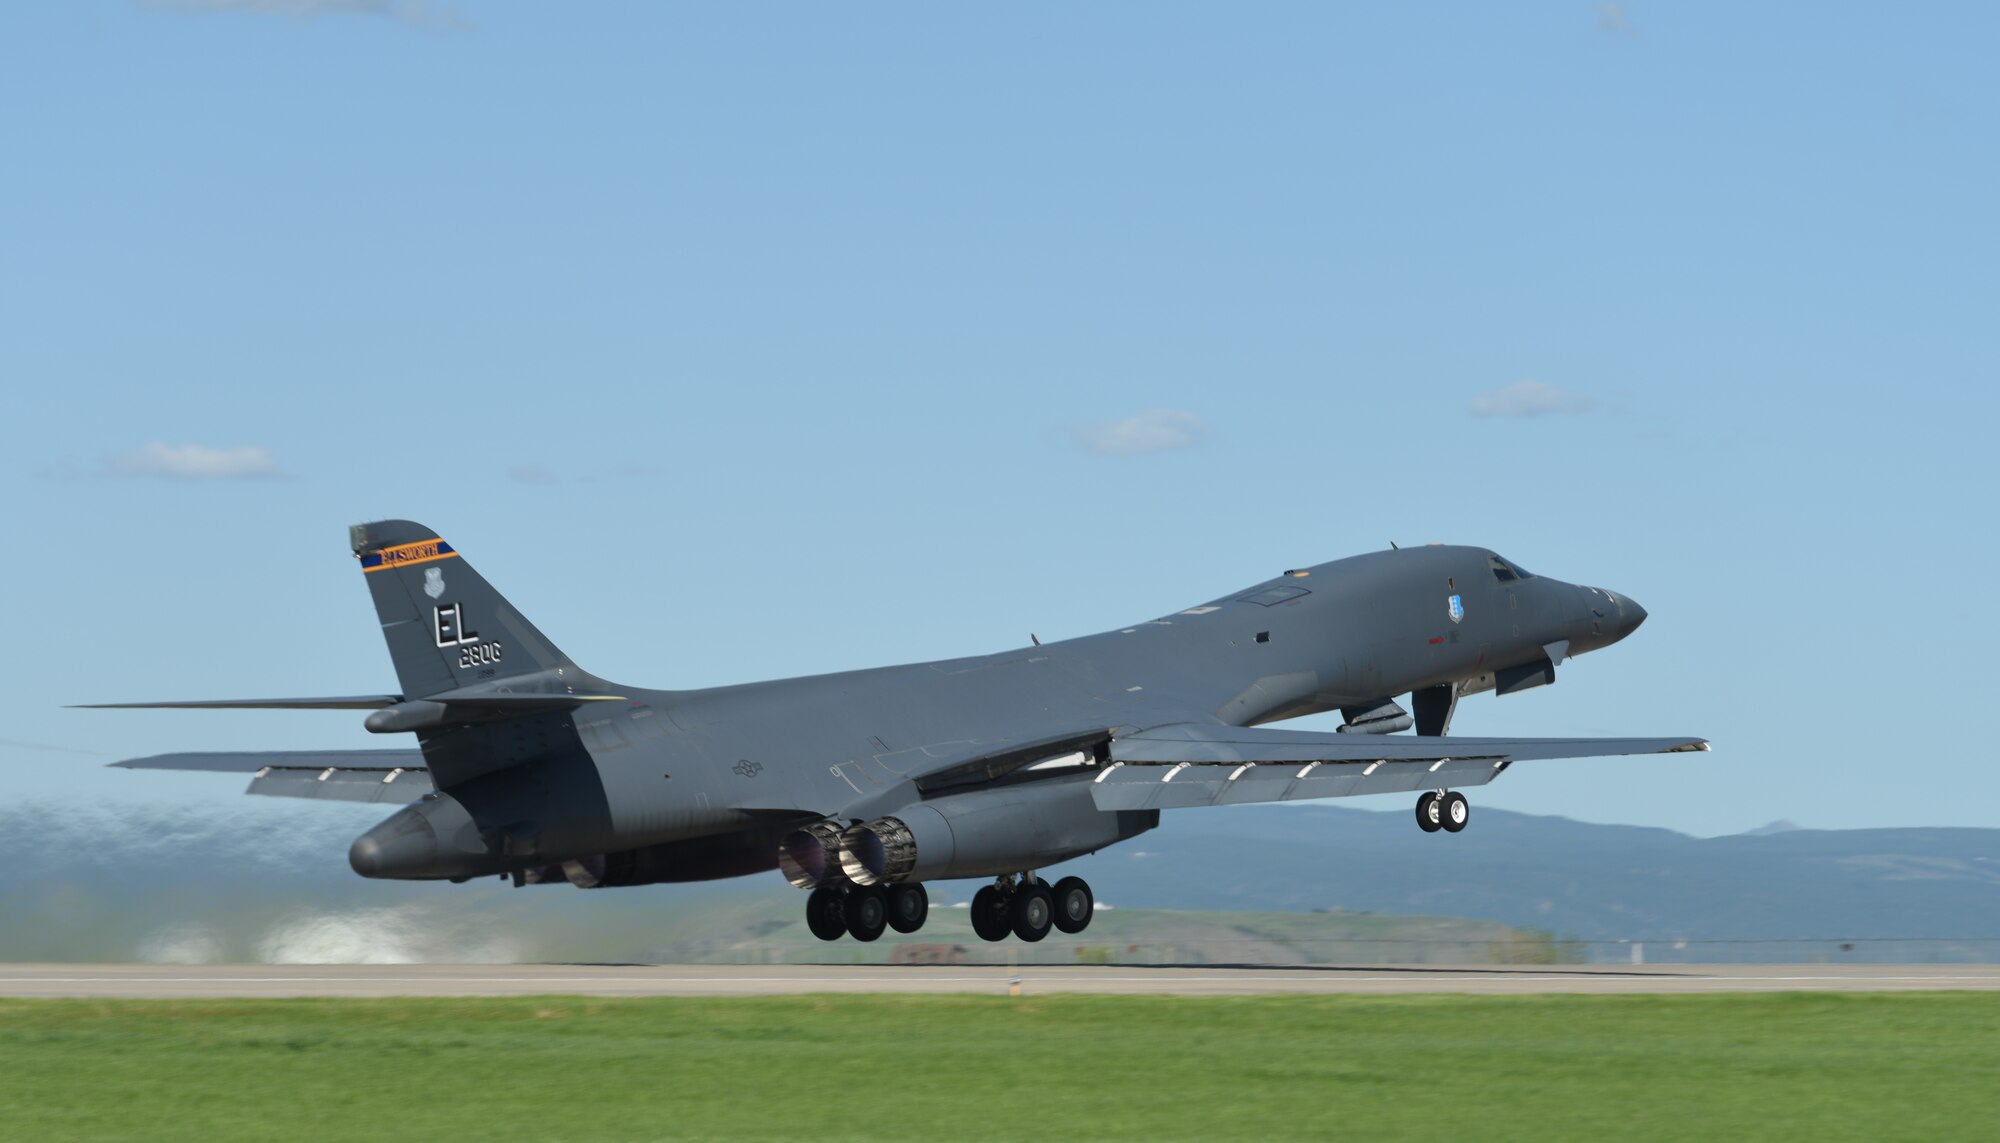 A B-1 bomber takes off to participate in Combat Raider 18-2 at Ellsworth Air Force Base, S.D., May 14, 2018. Combat Raider is a joint exercise that involves multiple airframes from different bases to prepare Airmen and the Air Force for potential future conflicts. (U.S. Air Force photo by Airman 1st Class Thomas Karol)